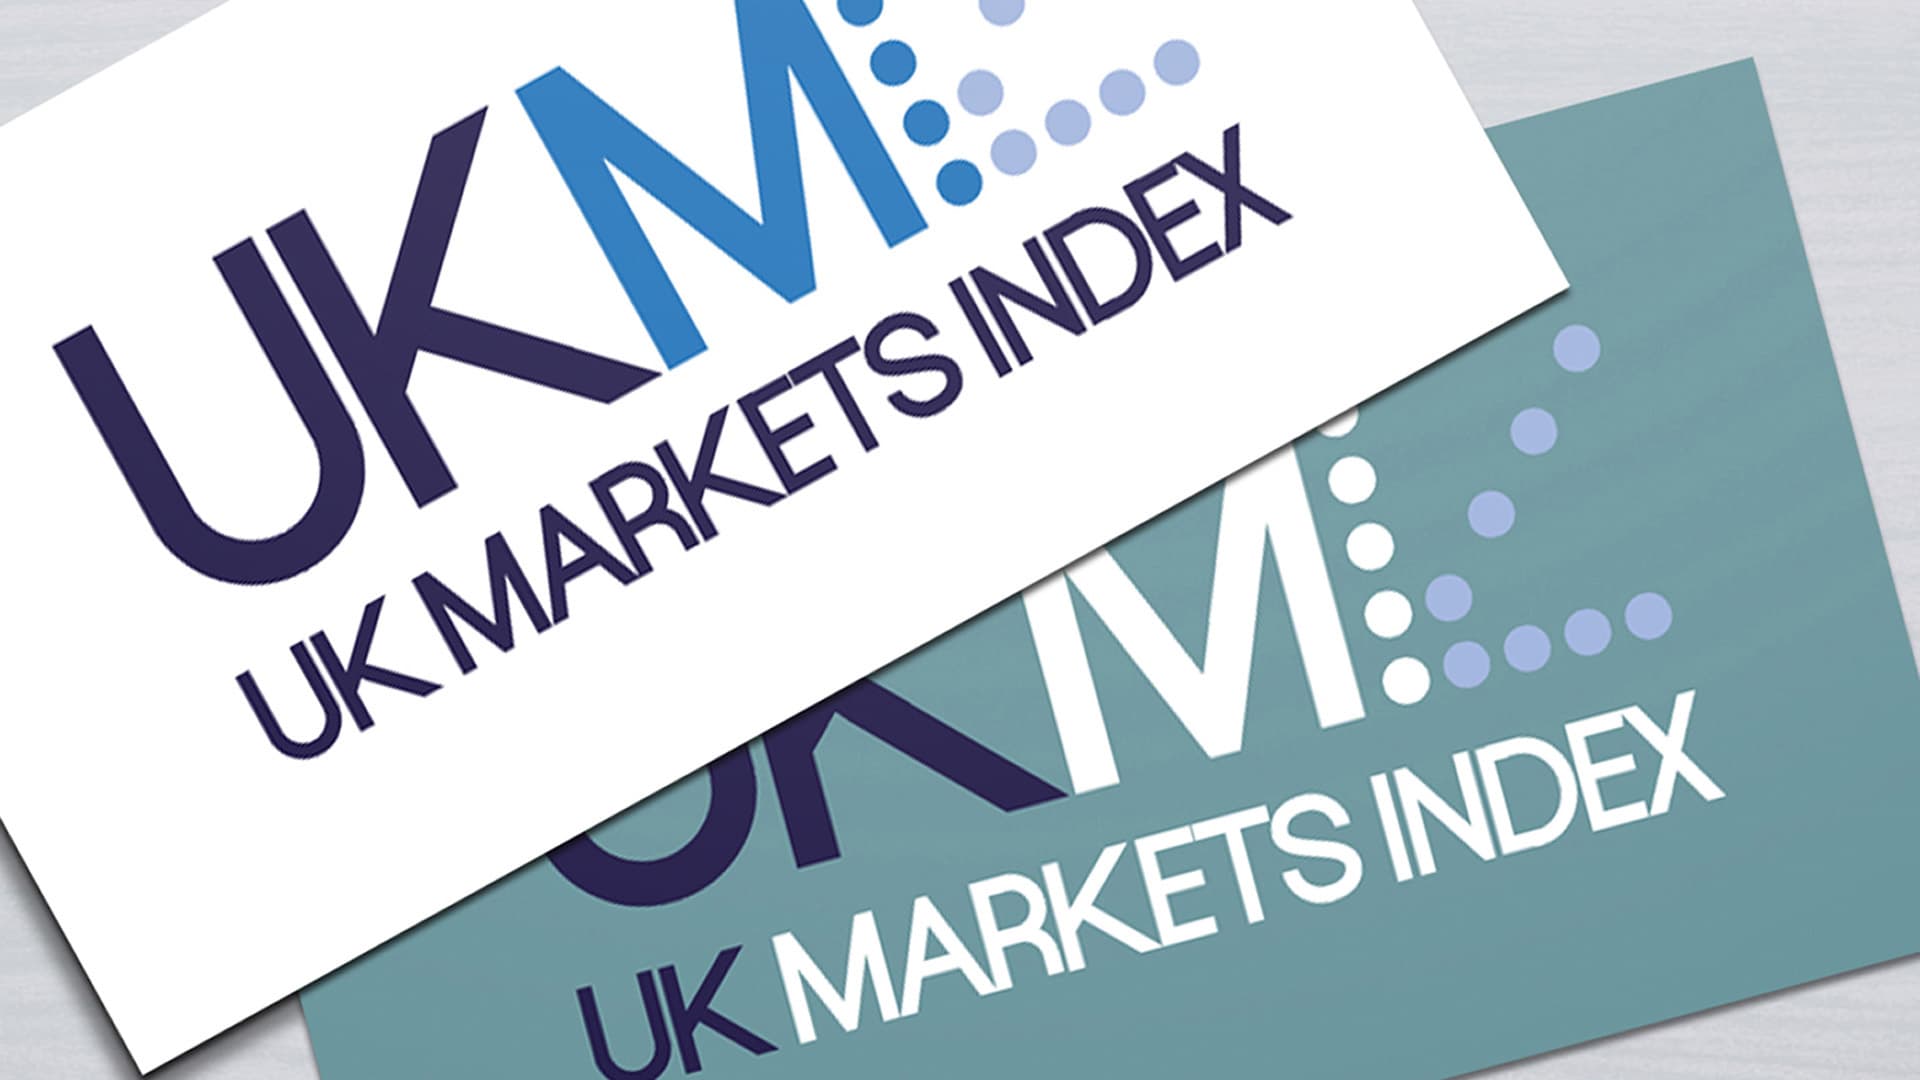 A close-up image of two UK Markets Index business cards with logo